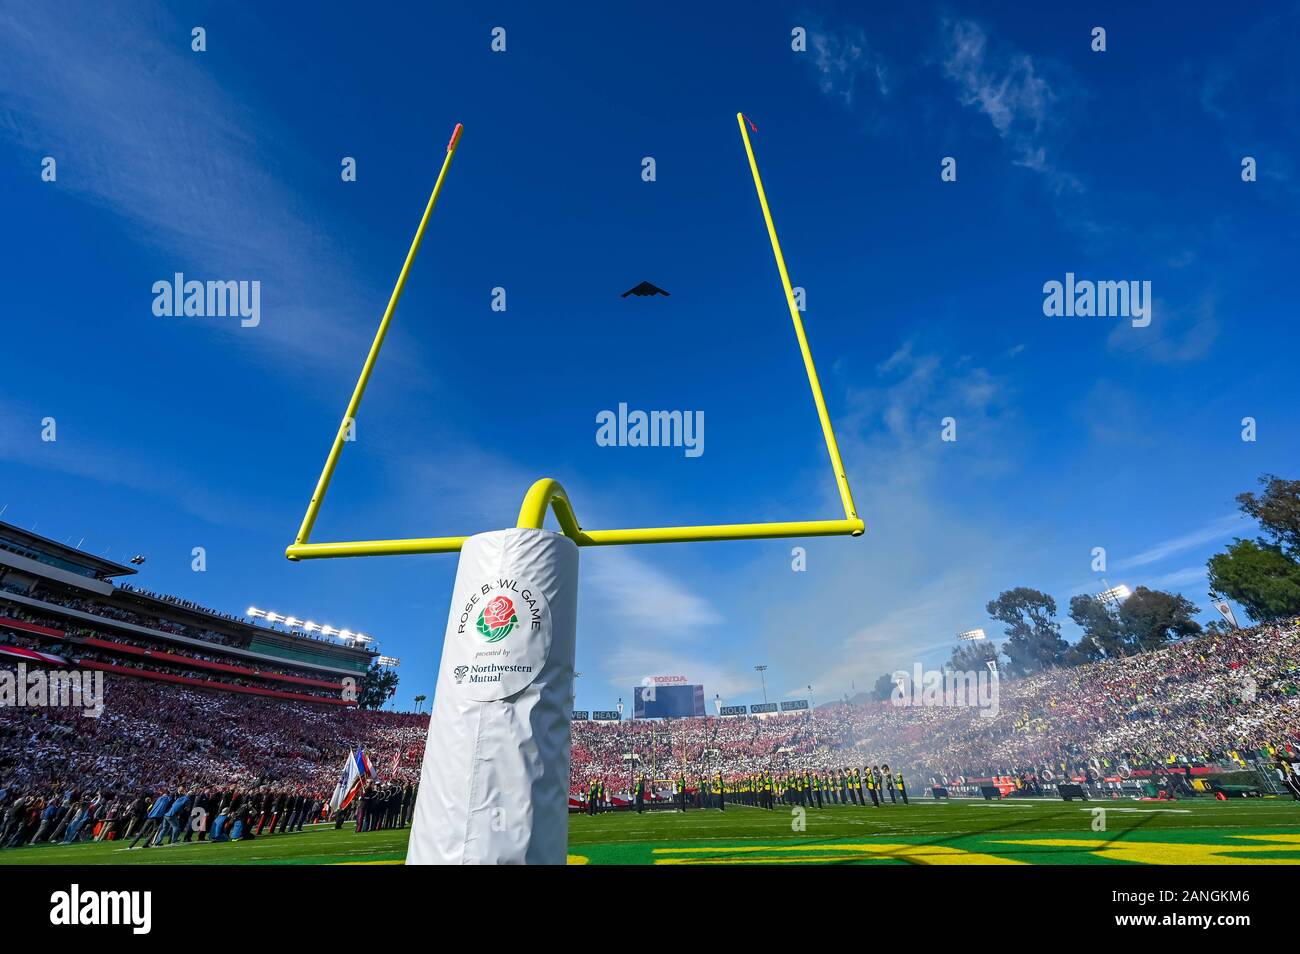 January 01, 2020 - Pasadena, CA, USA : B-2 Stealth Bomber flyover piloted by U.S. Air Force Lt. Col. Nicola â€œRougeâ€ Polidor to kick off the start of the 106th Rose Bowl game between the Oregon Ducks and the Wisconsin Badgers at Rose Bowl Stadium Â©Maria Lysaker/CSM Stock Photo